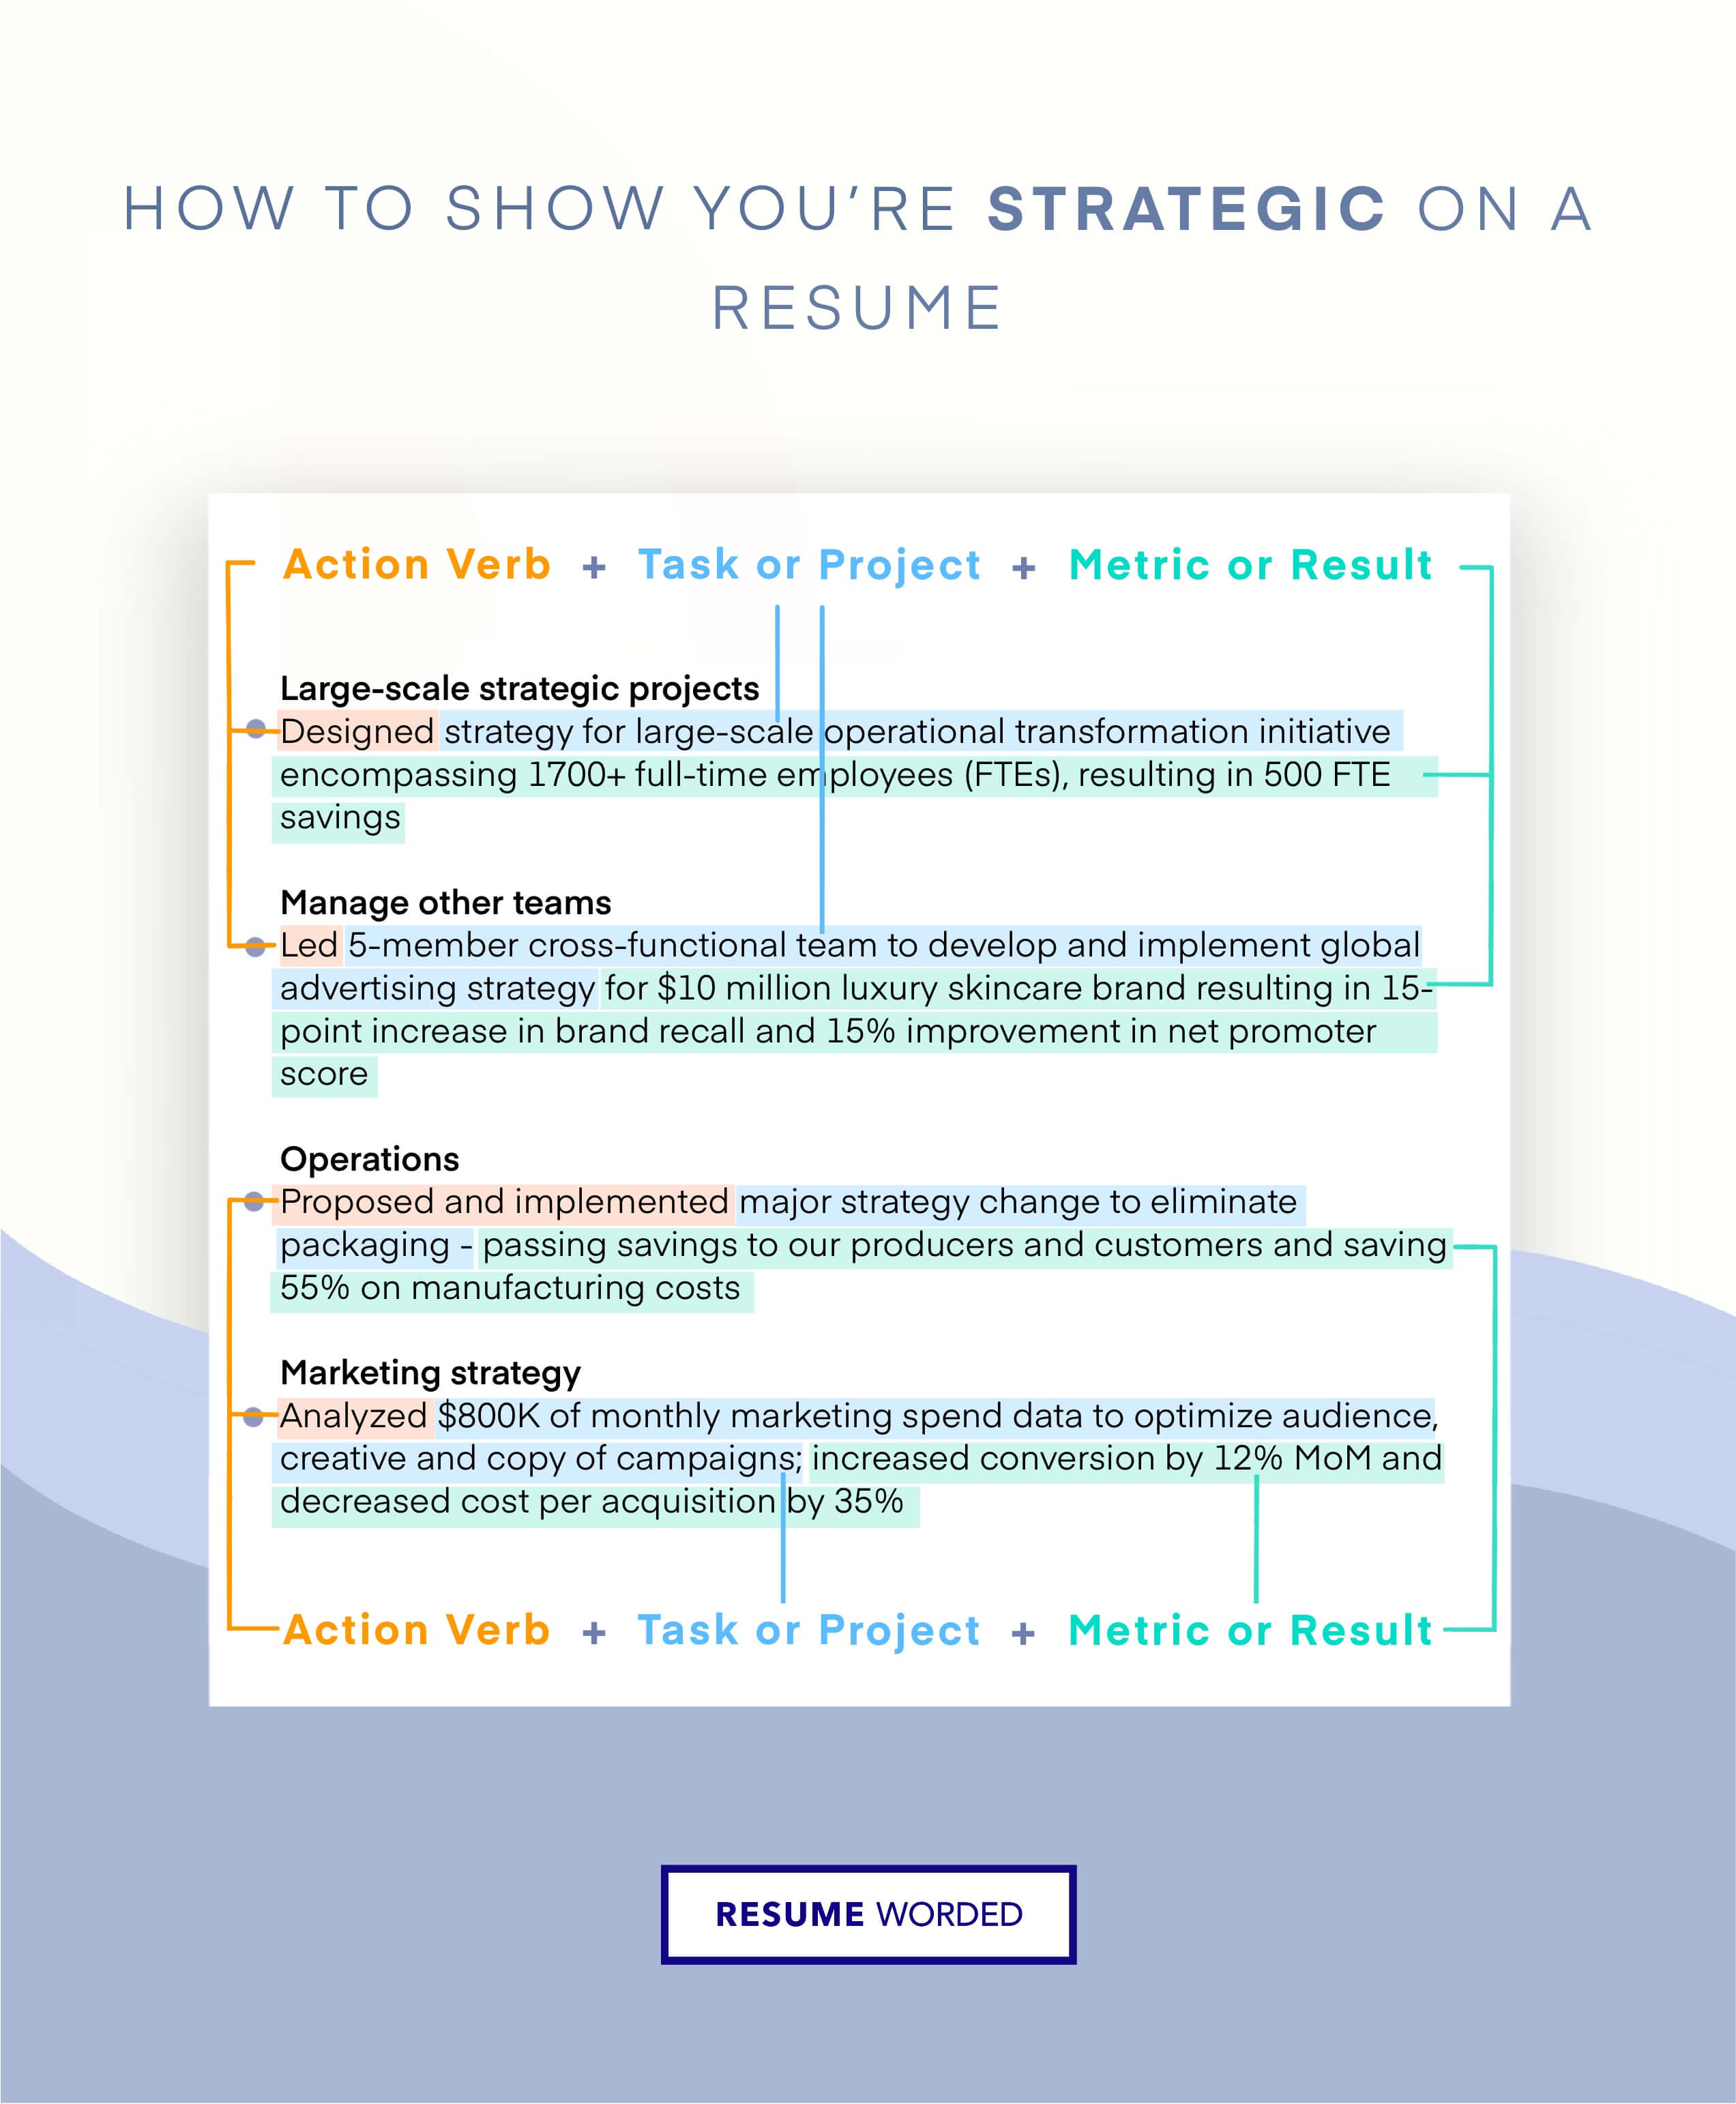 Highlight your expertise in strategic planning - Category Manager Resume